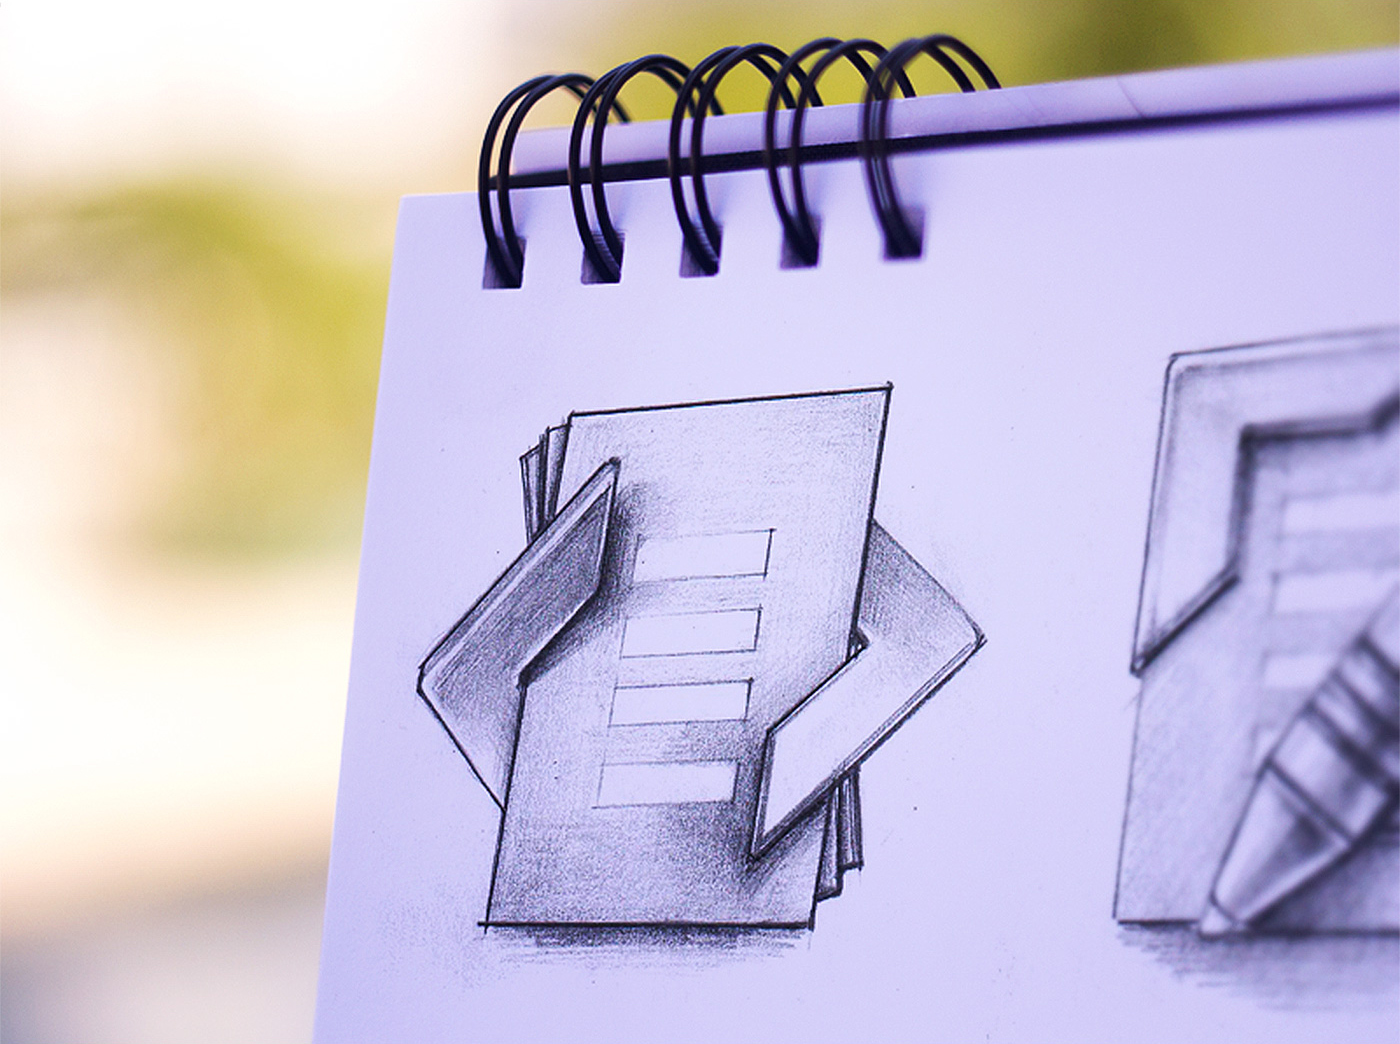 Icon icons sketch sketches concepts app application paper pencil iphone mac ios Ramotion design